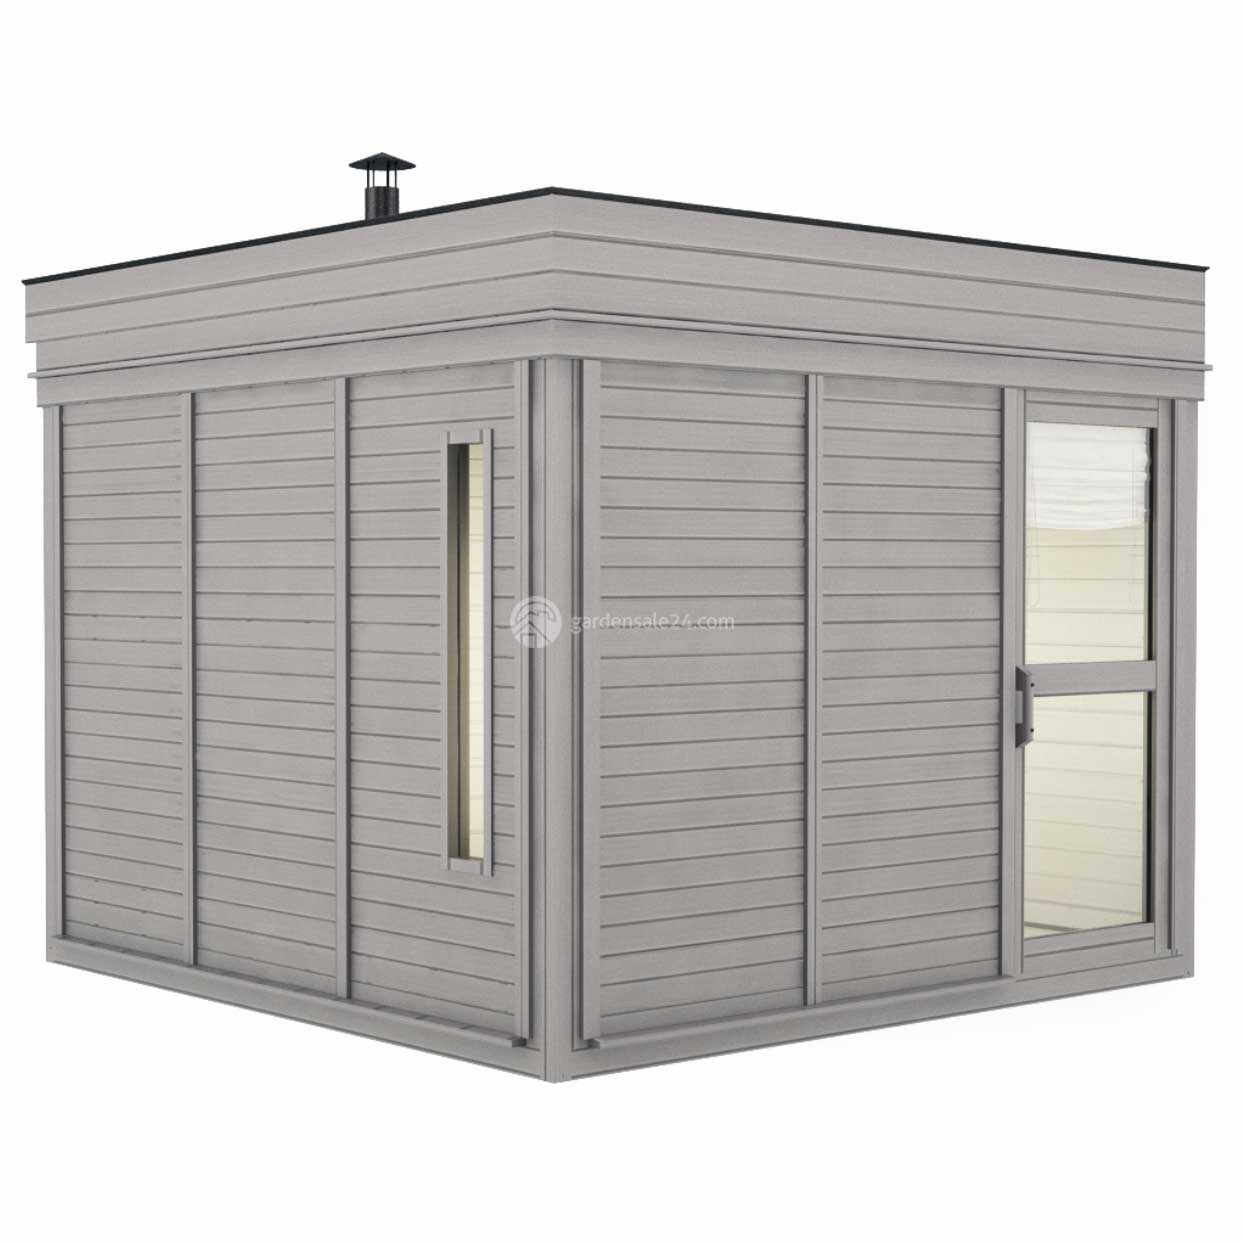 Sauna Cube With Changing Room (3 x 3)